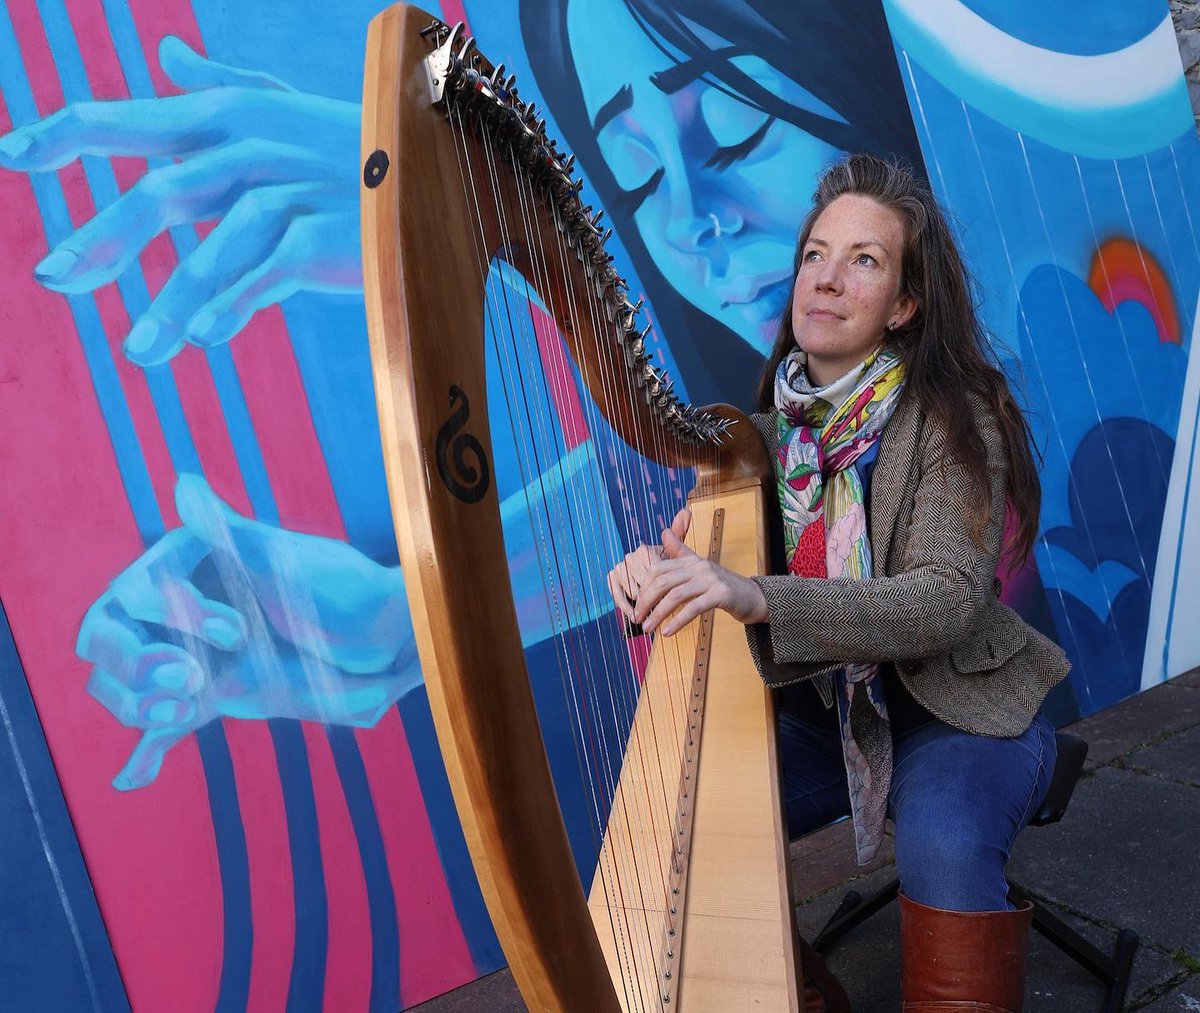 Happy international Harp Day!
I’m happy to reveal my mural celebrating Lá na Cruite #HarpDay2022. 
I finished the artwork while @HarpAisling was performing a beautiful piece. It was such an interesting  type of collaboration! 🎶 
Thank you @harpirl 
📸 Picture 2 by @maxwellpix